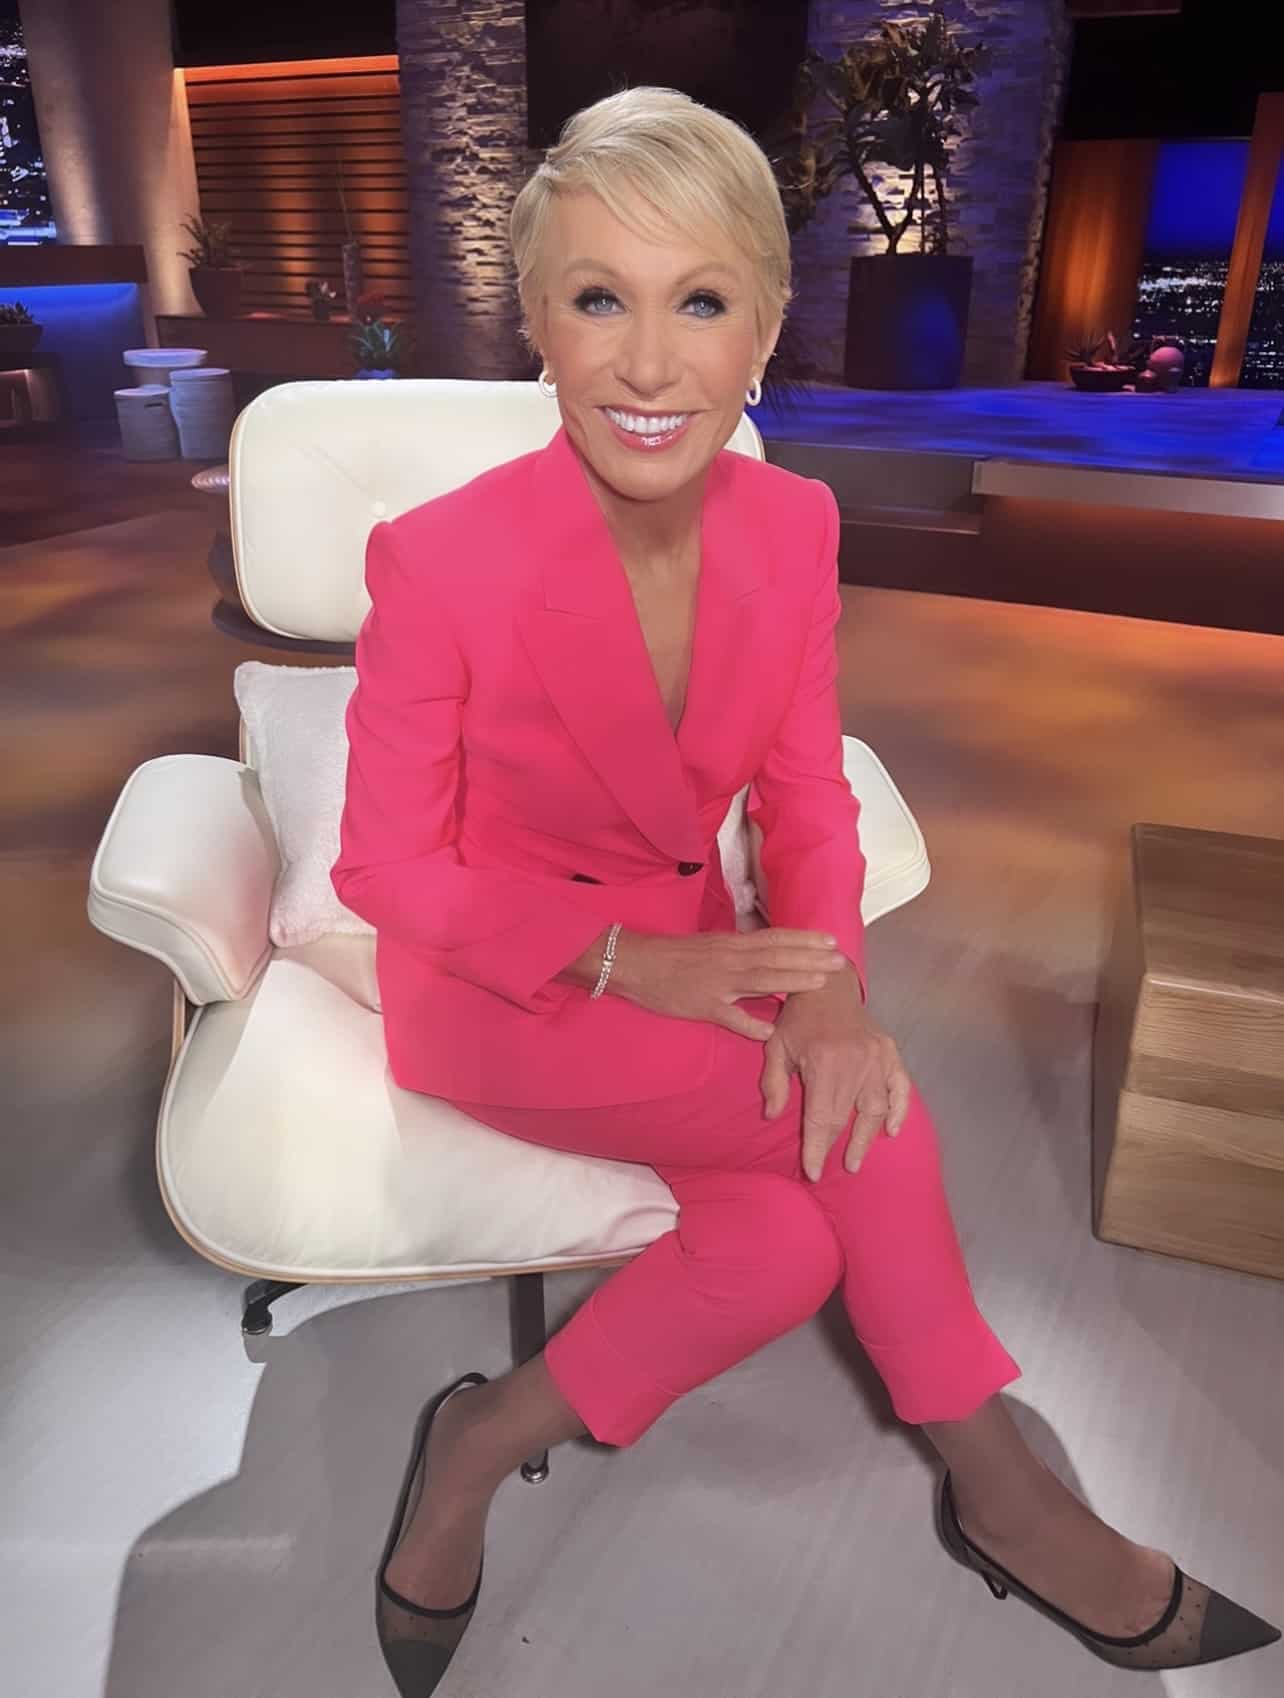 How rich is Barbara Corcoran?